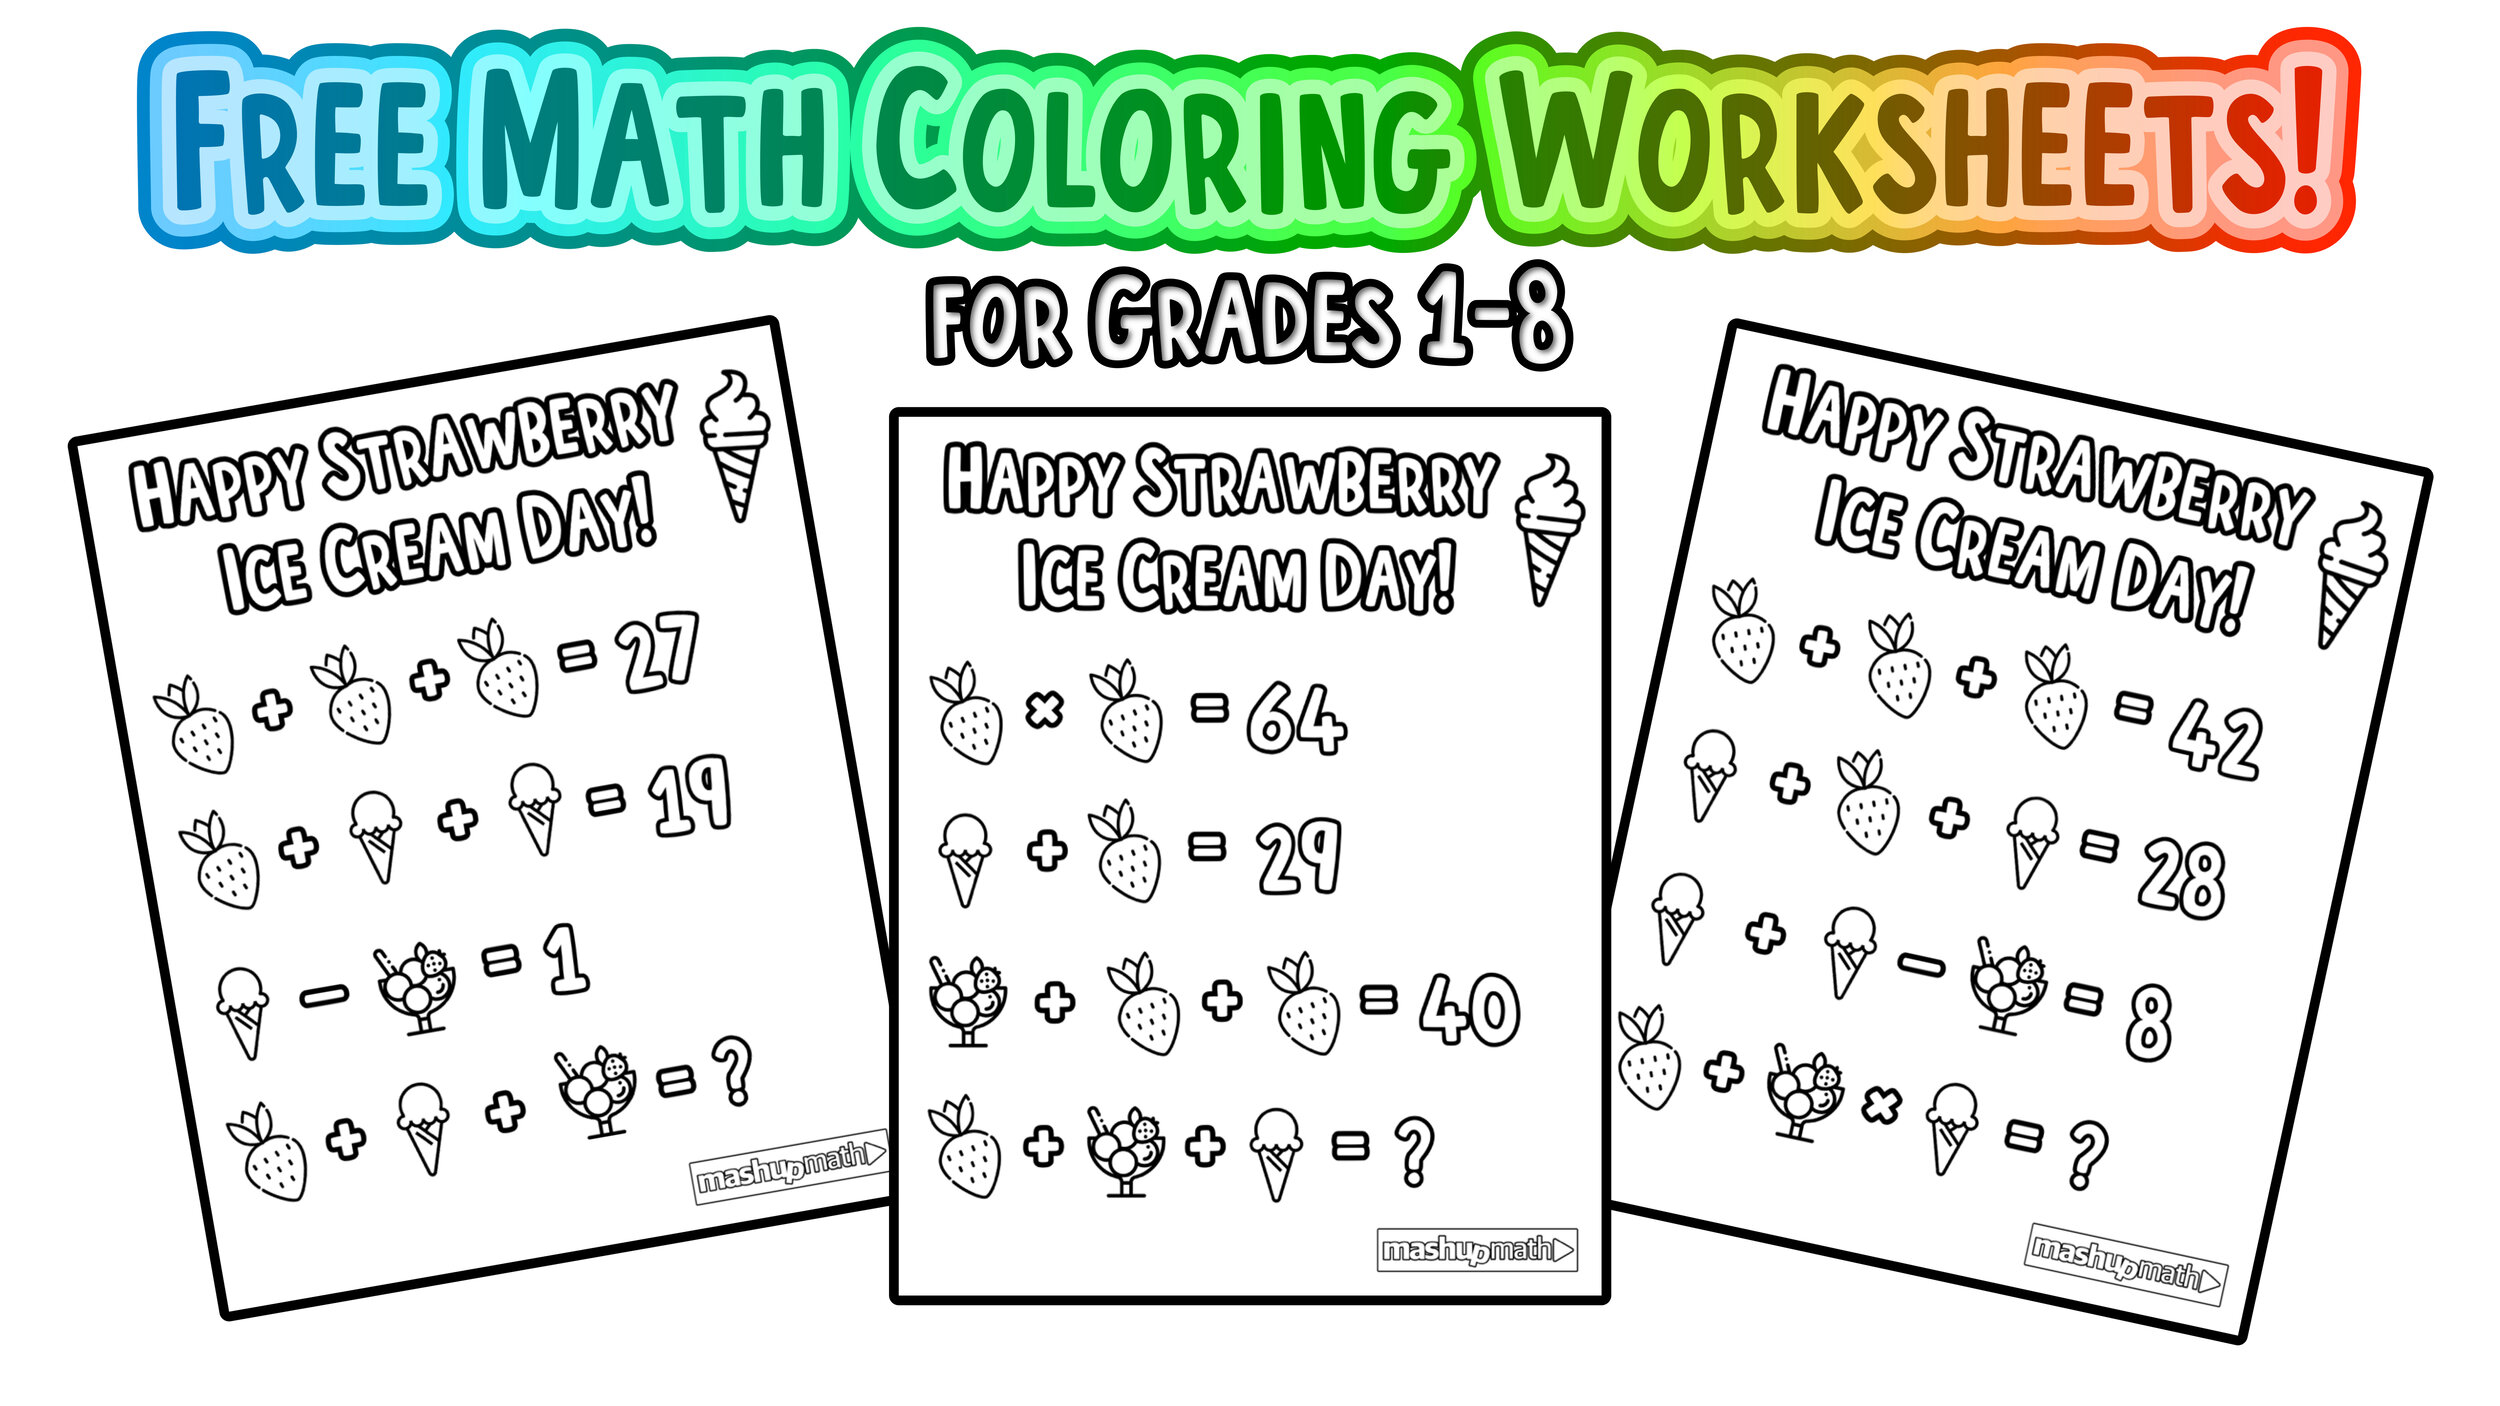 Free Math Coloring Pages and Worksheets for Grades 1-8